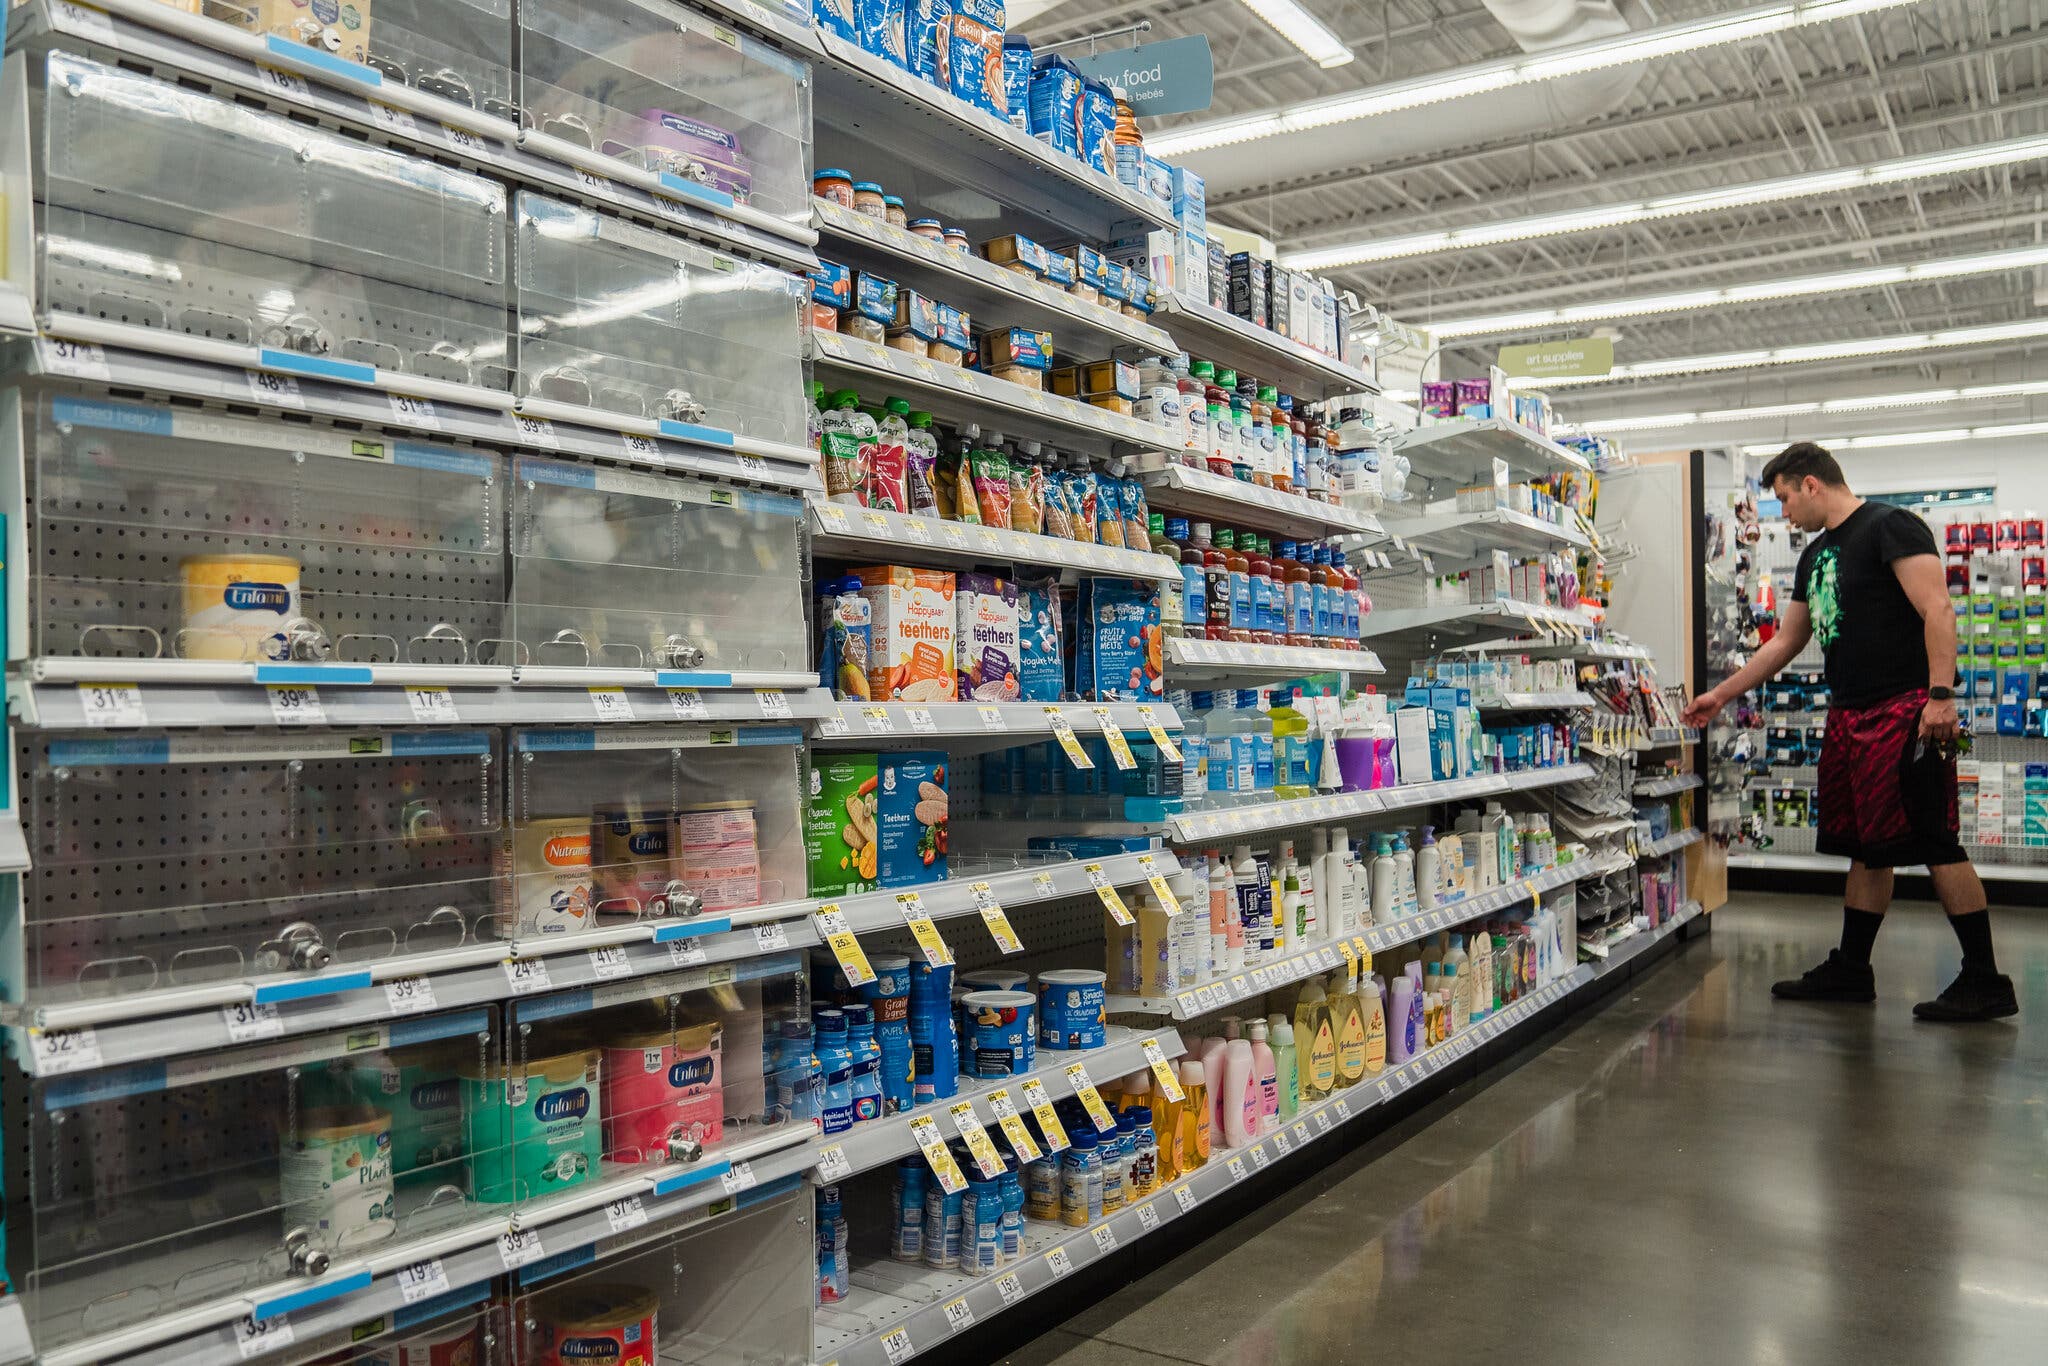 A nearly empty shelf of baby formula in San Diego last week. The nationwide shortage has been a challenge for parents and doctors.Credit...